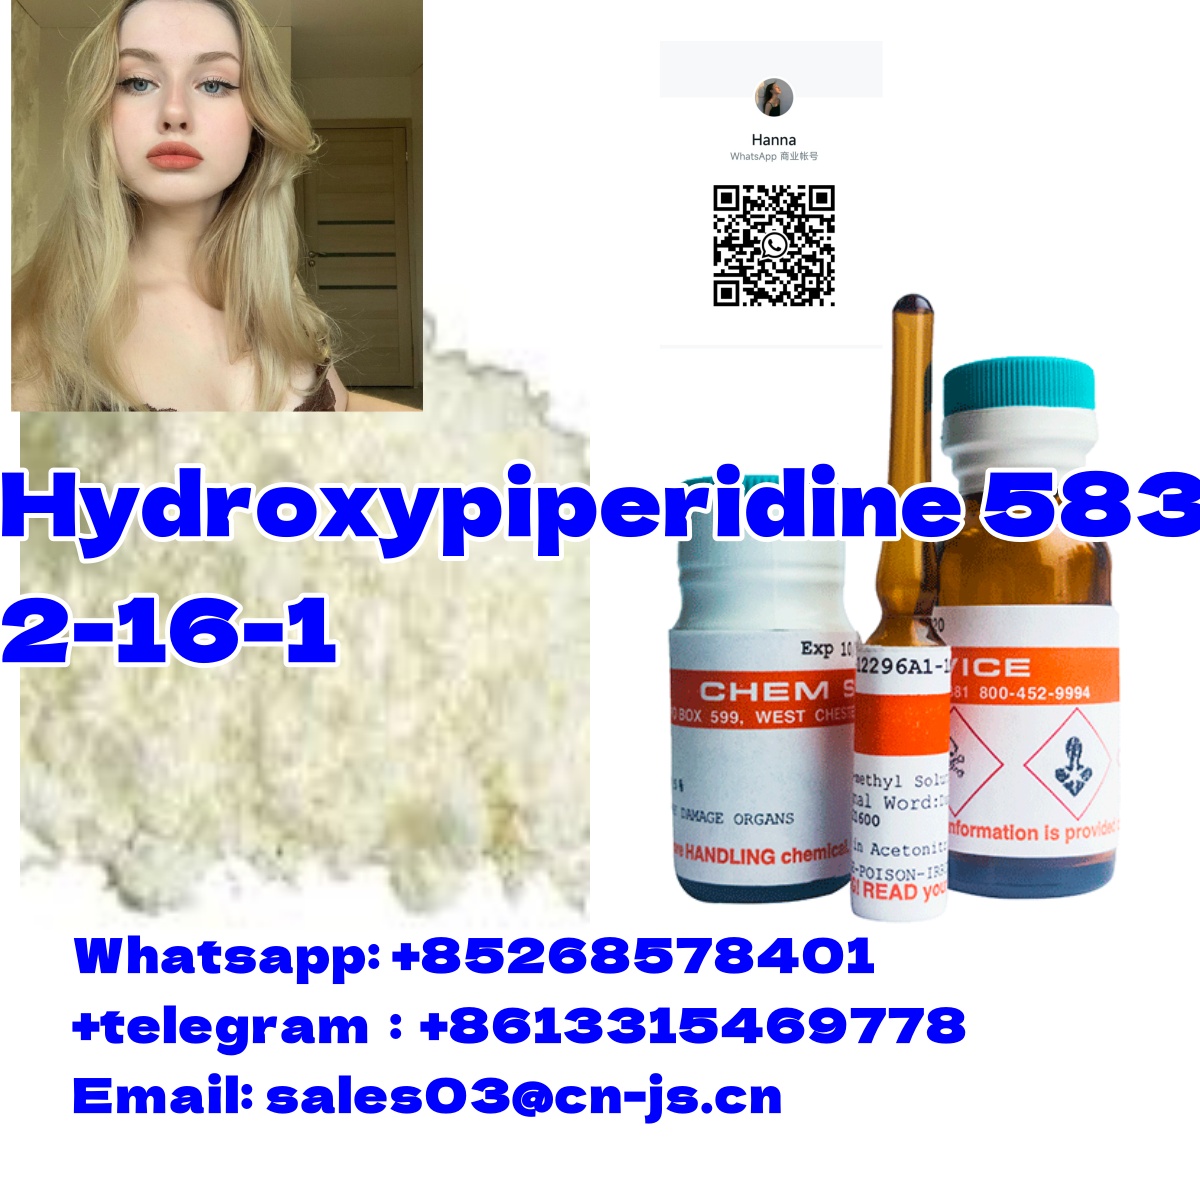 factory Outlet Hydroxypiperidine 5832－16－1,111,Cars,Free Classifieds,Post Free Ads,77traders.com